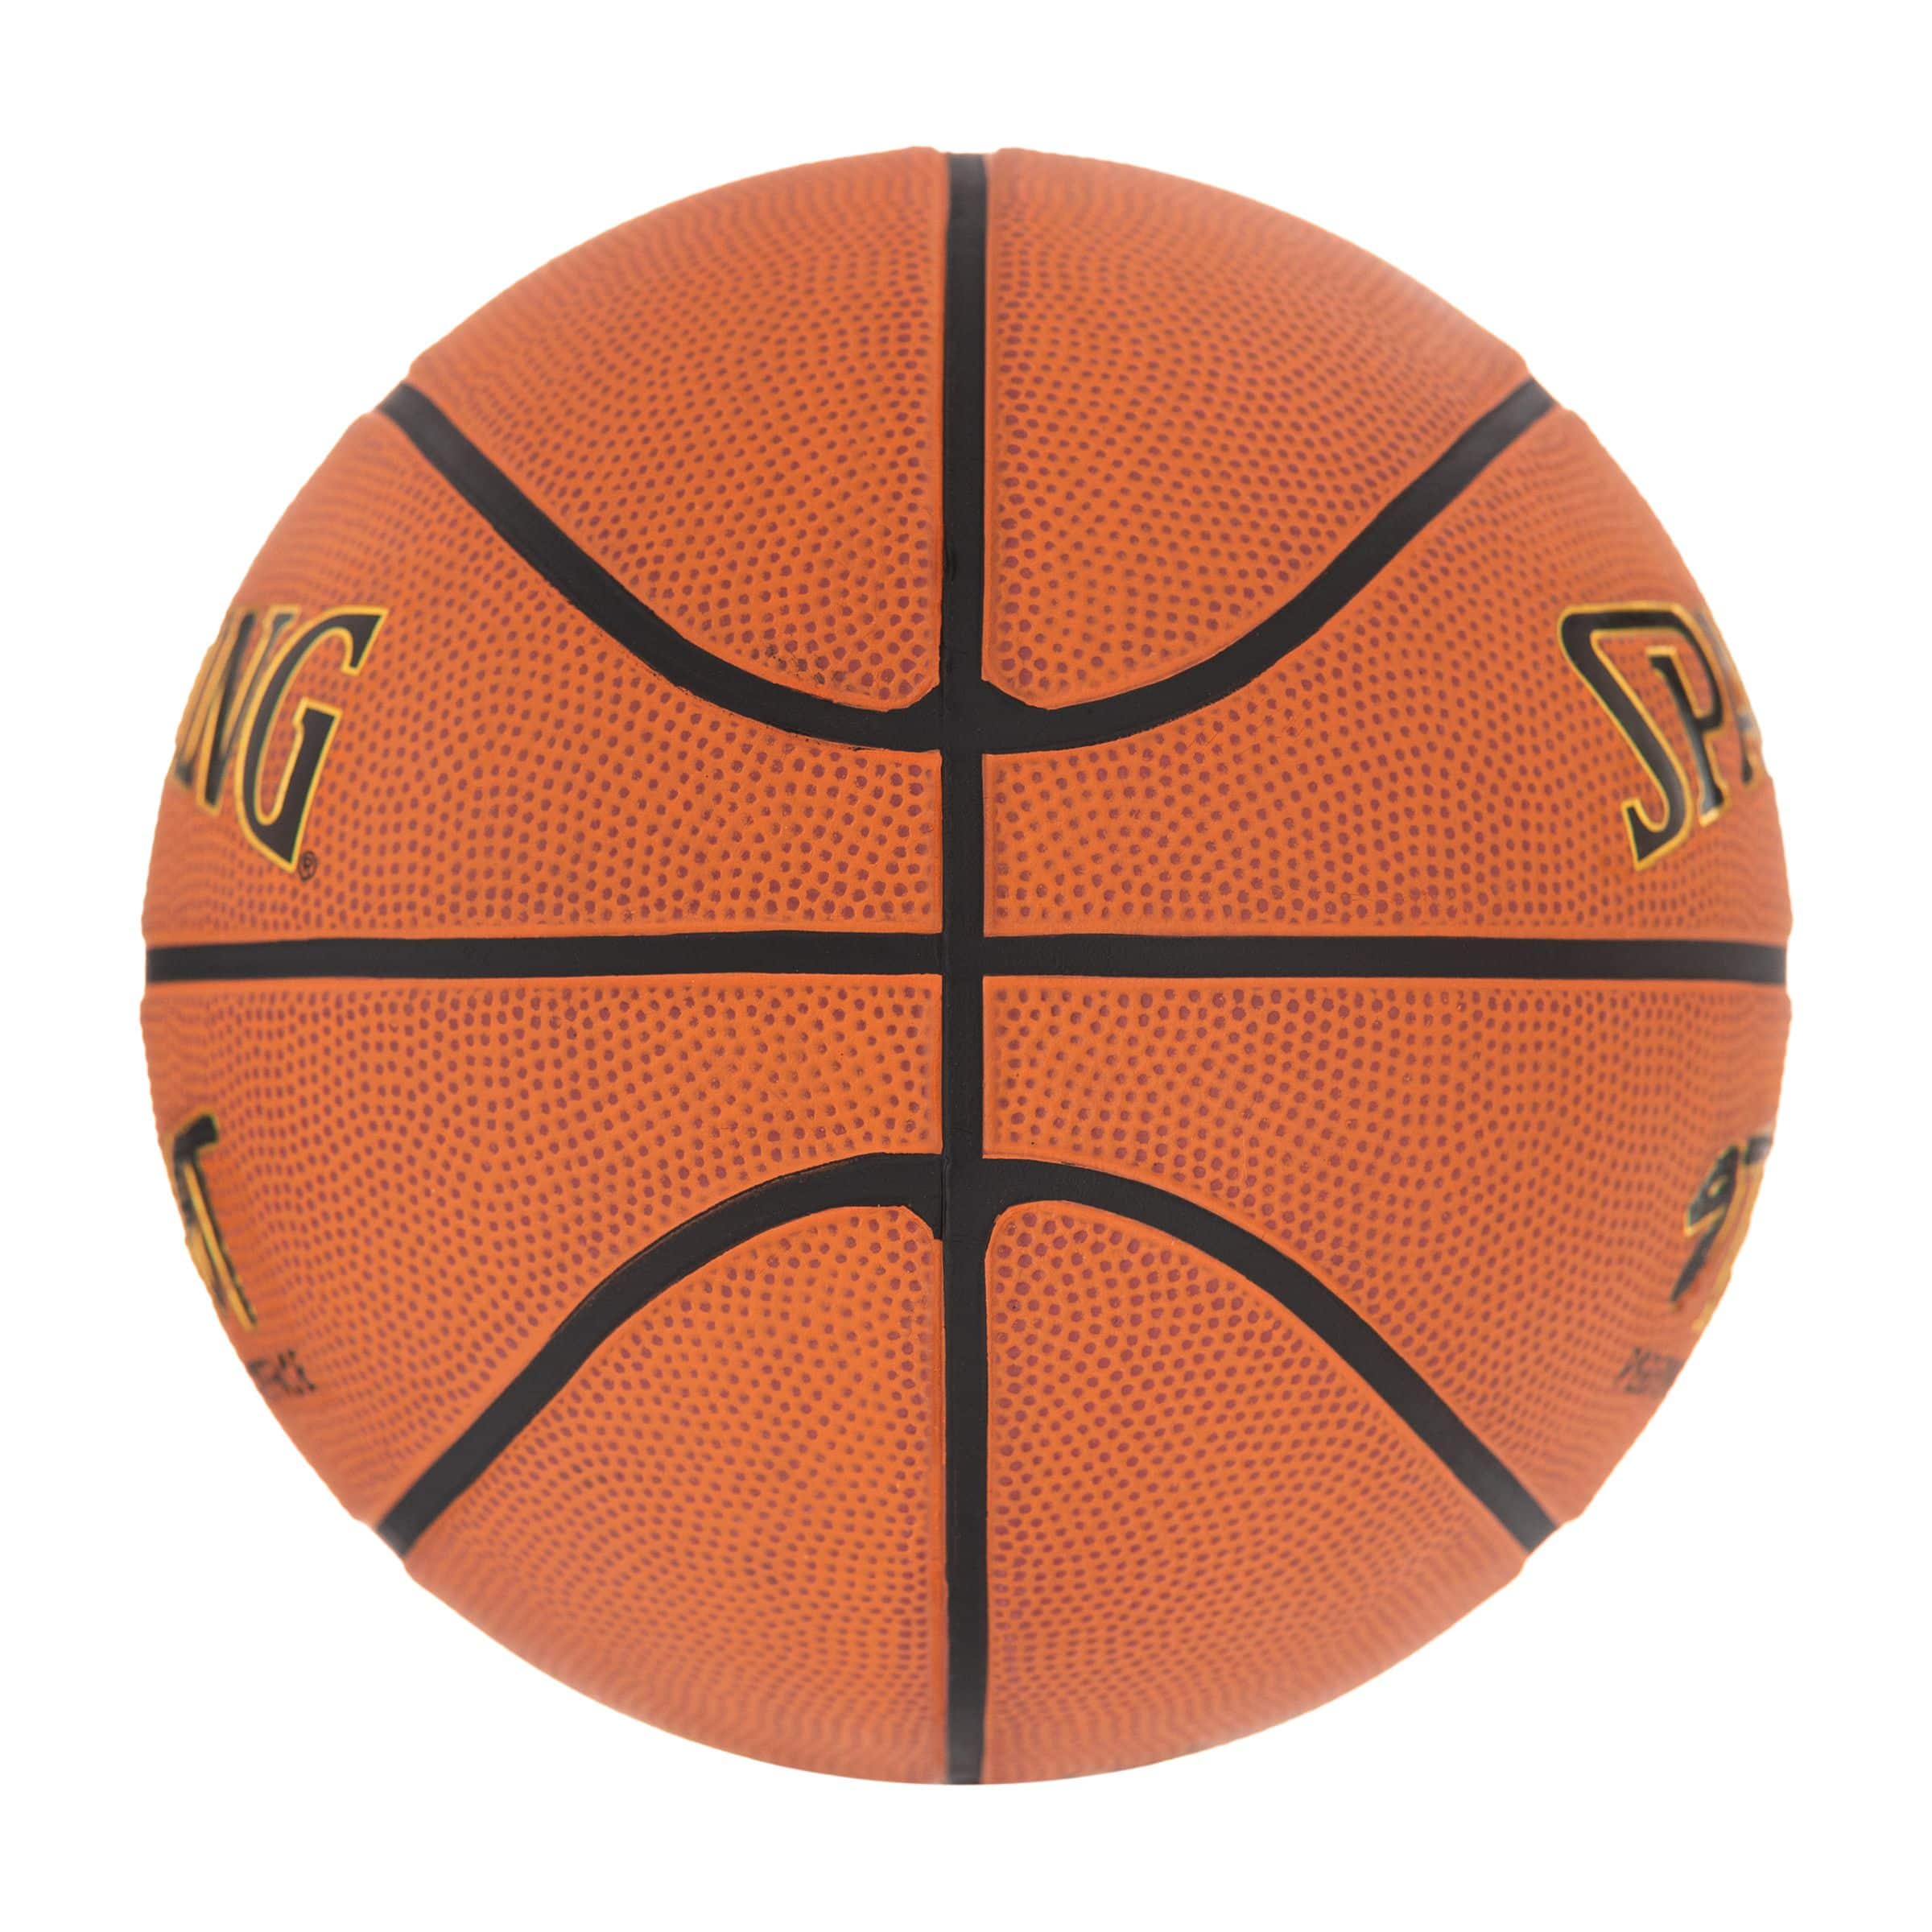 Spalding Street Performance All Surface Outdoor Rubber Basketball, Official  Size 7 (29.5-in)